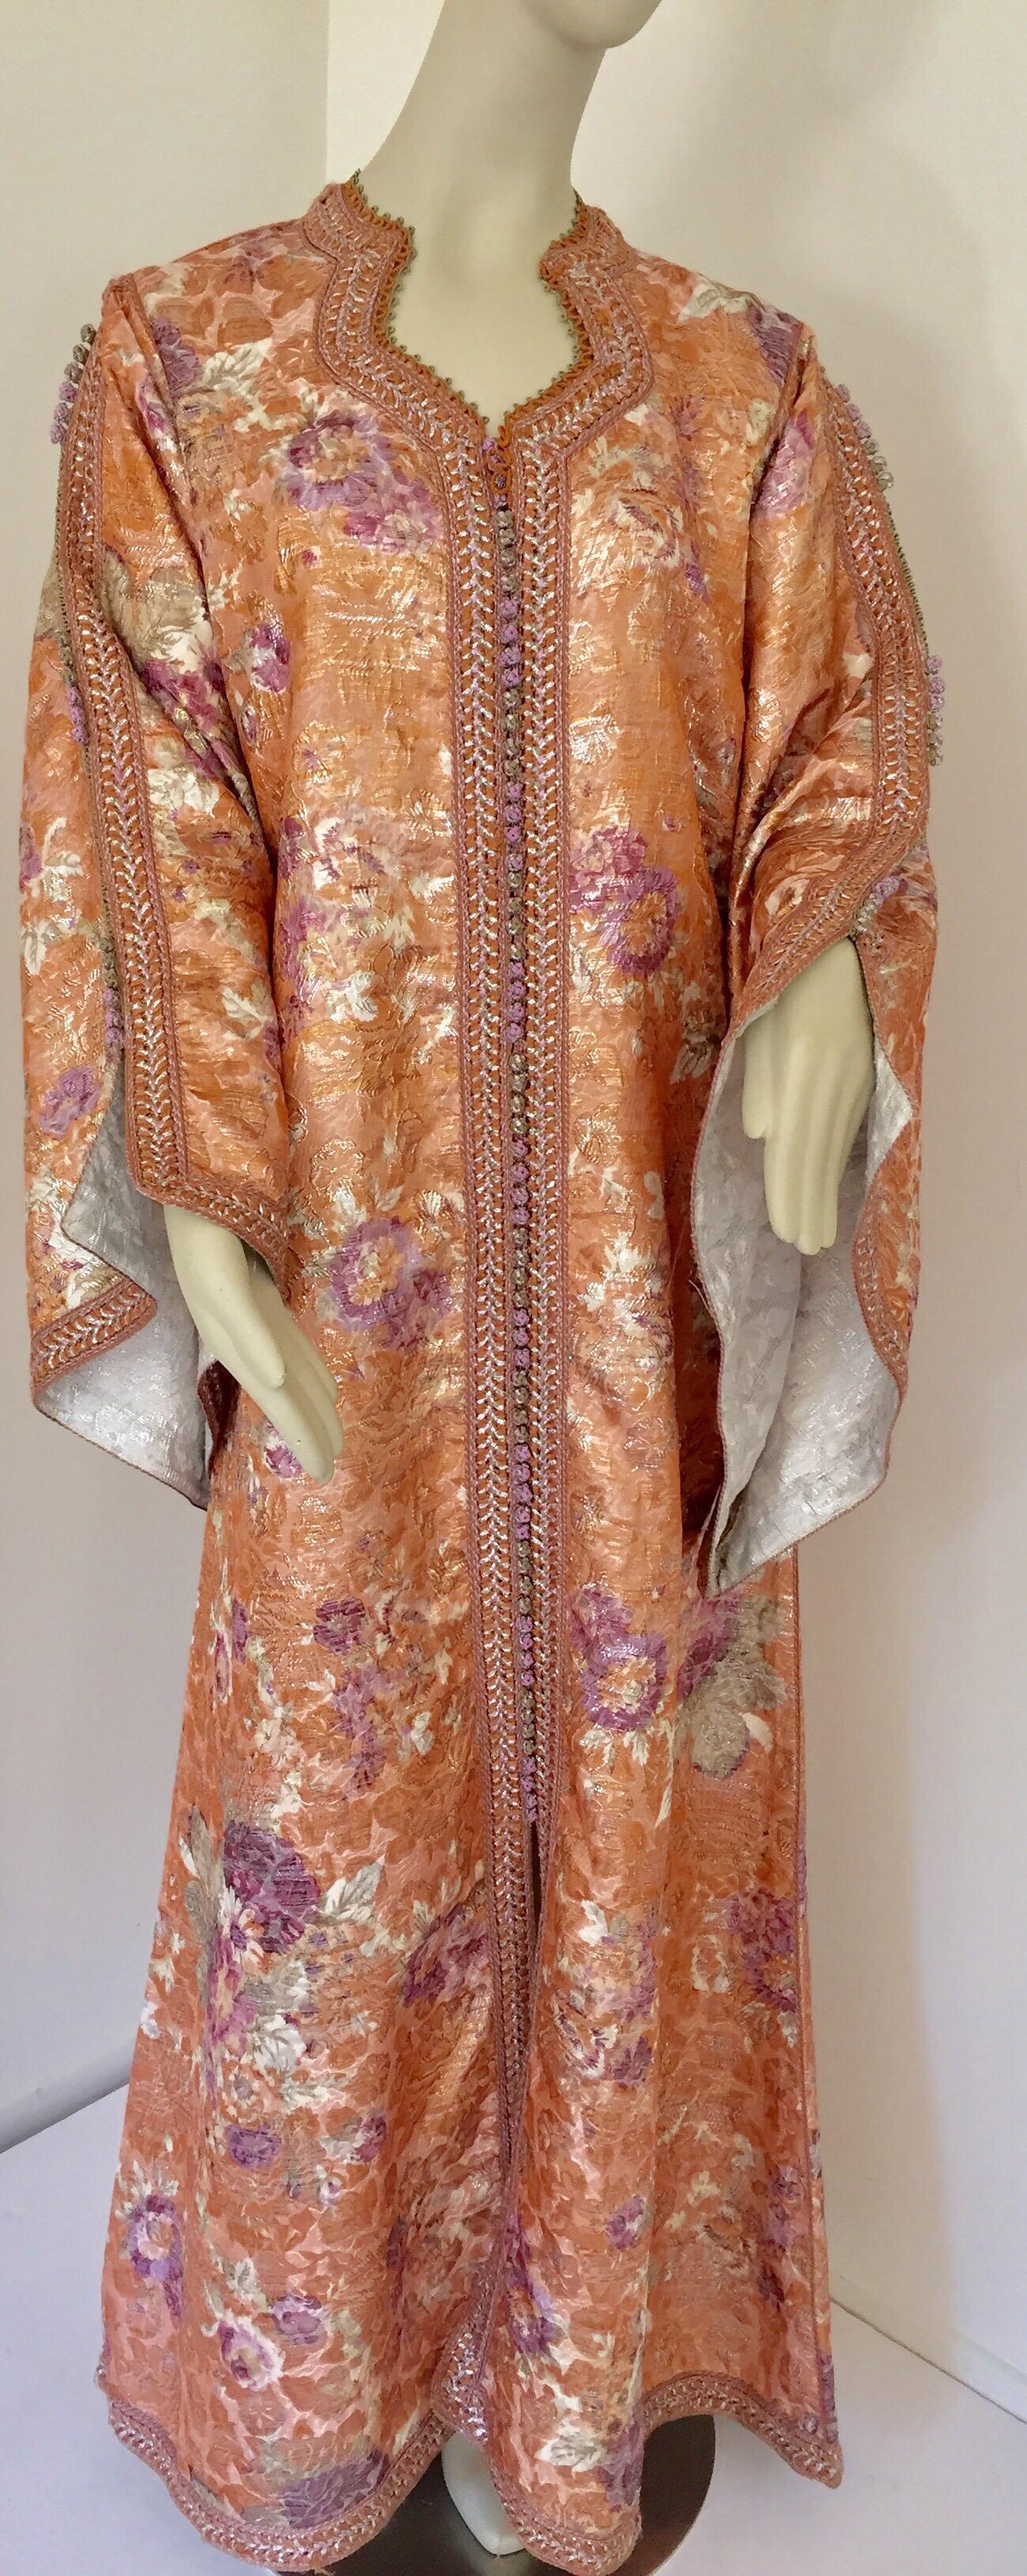 Moroccan Kaftan Orange and Purple Floral with Gold Embroidered Maxi Dress Caftan For Sale 2